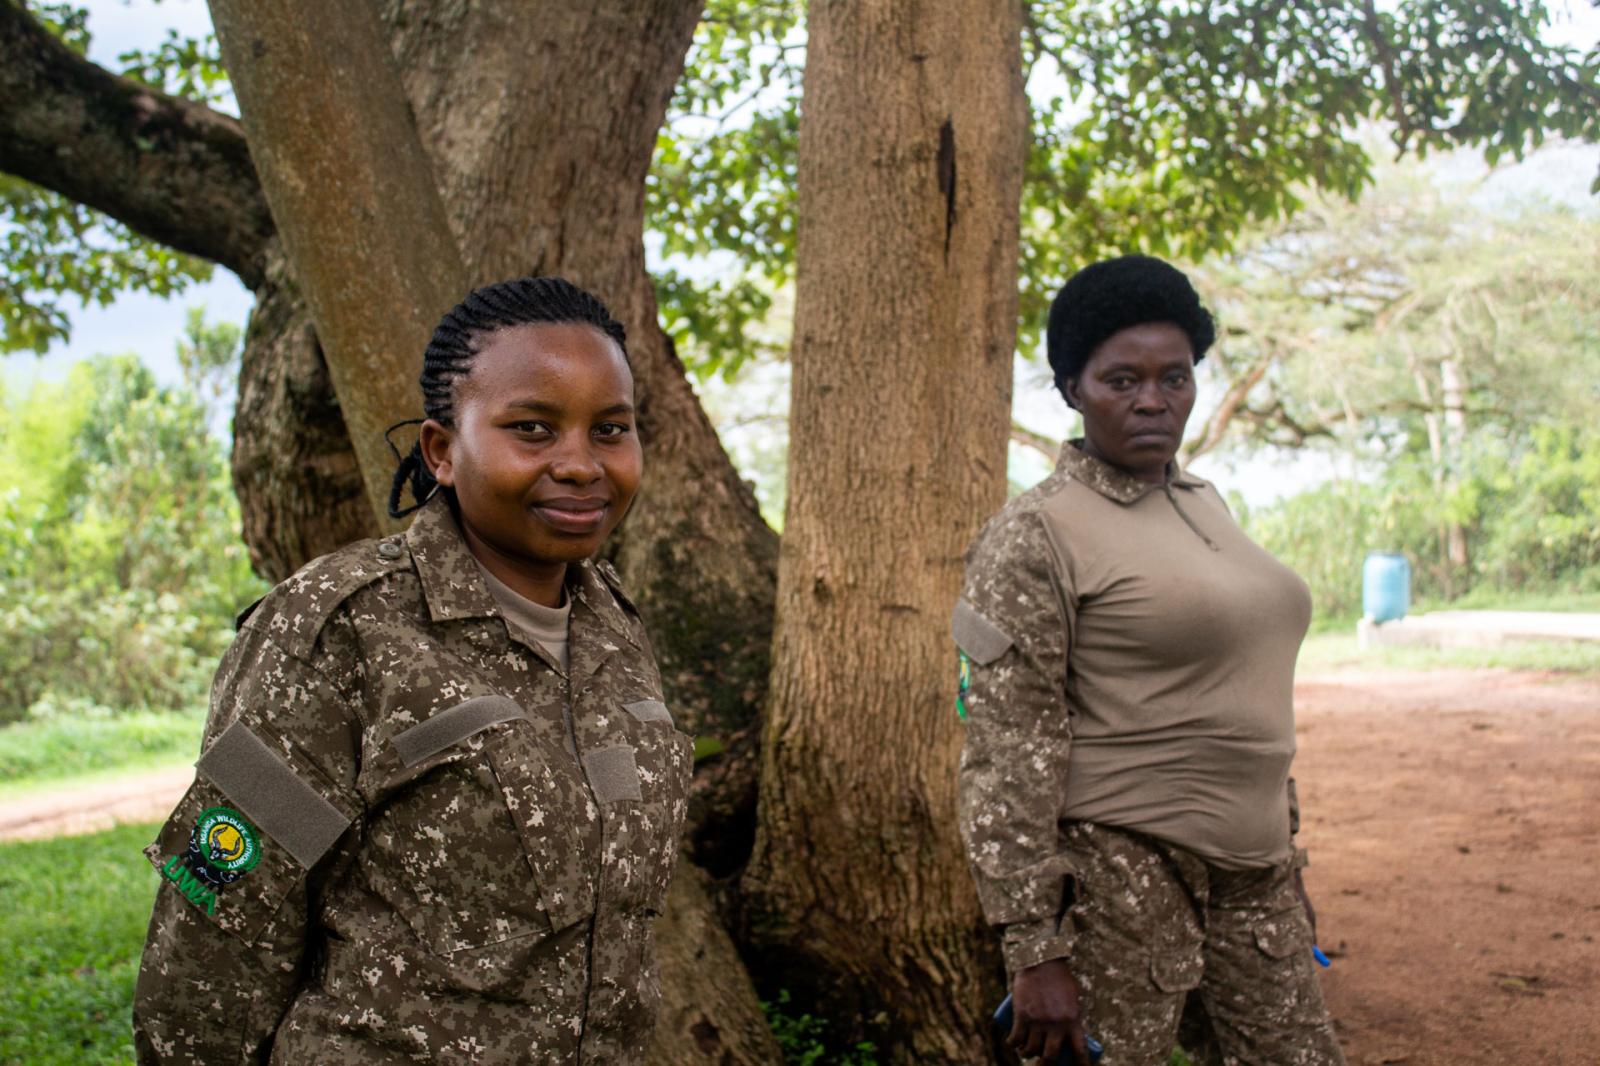 Annasezi, who has been a ranger for 15 years, stands alongside her colleague Loice, who joined the force three years ago.